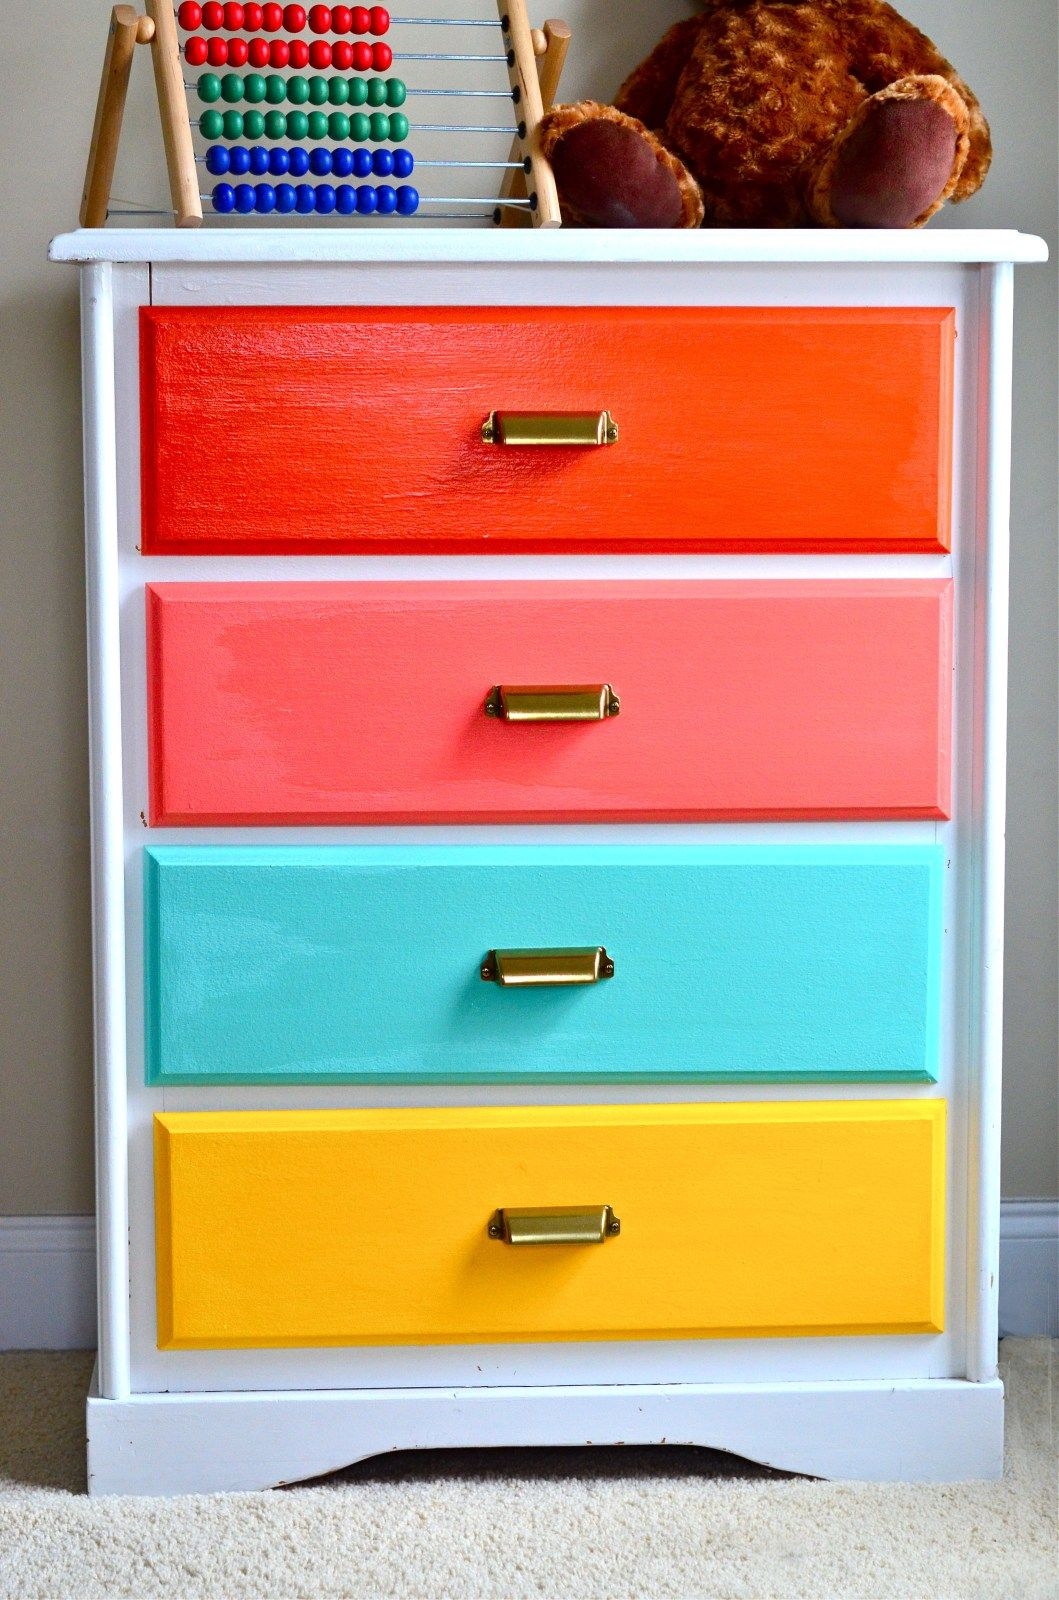 childrens chest of drawers